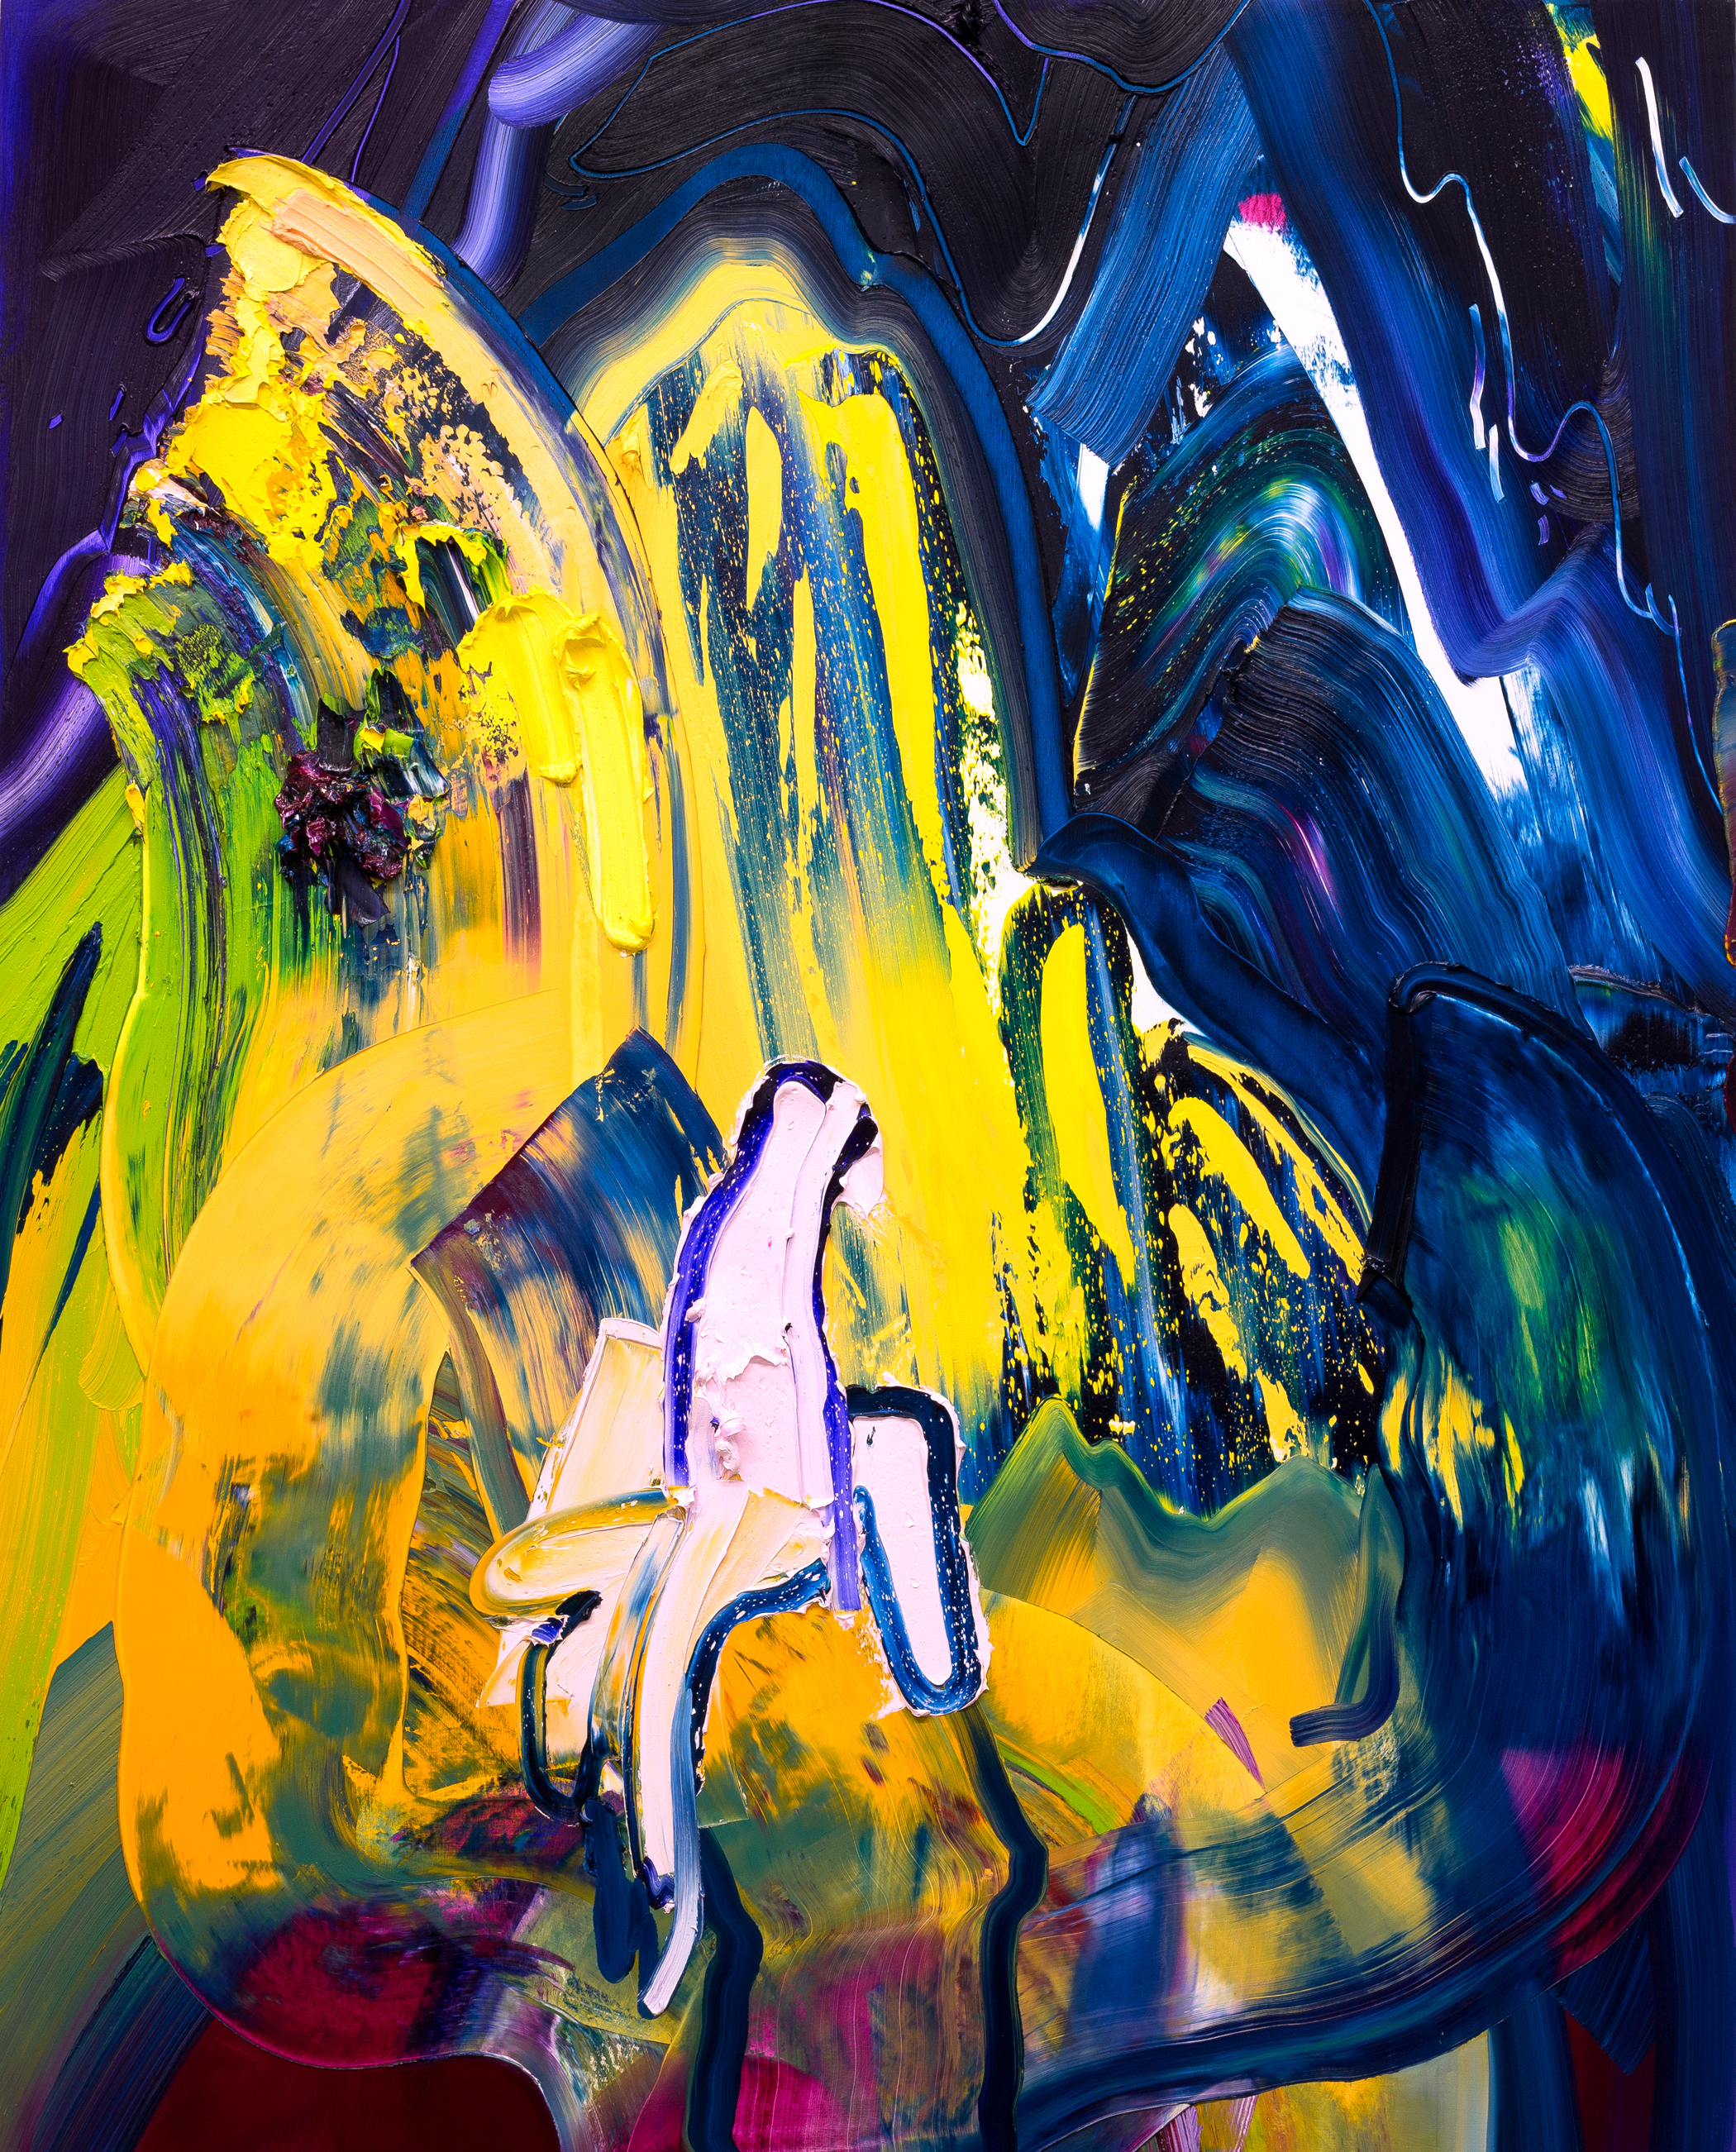 Genie / oil on canvas / 60 x 48 inches (sold)